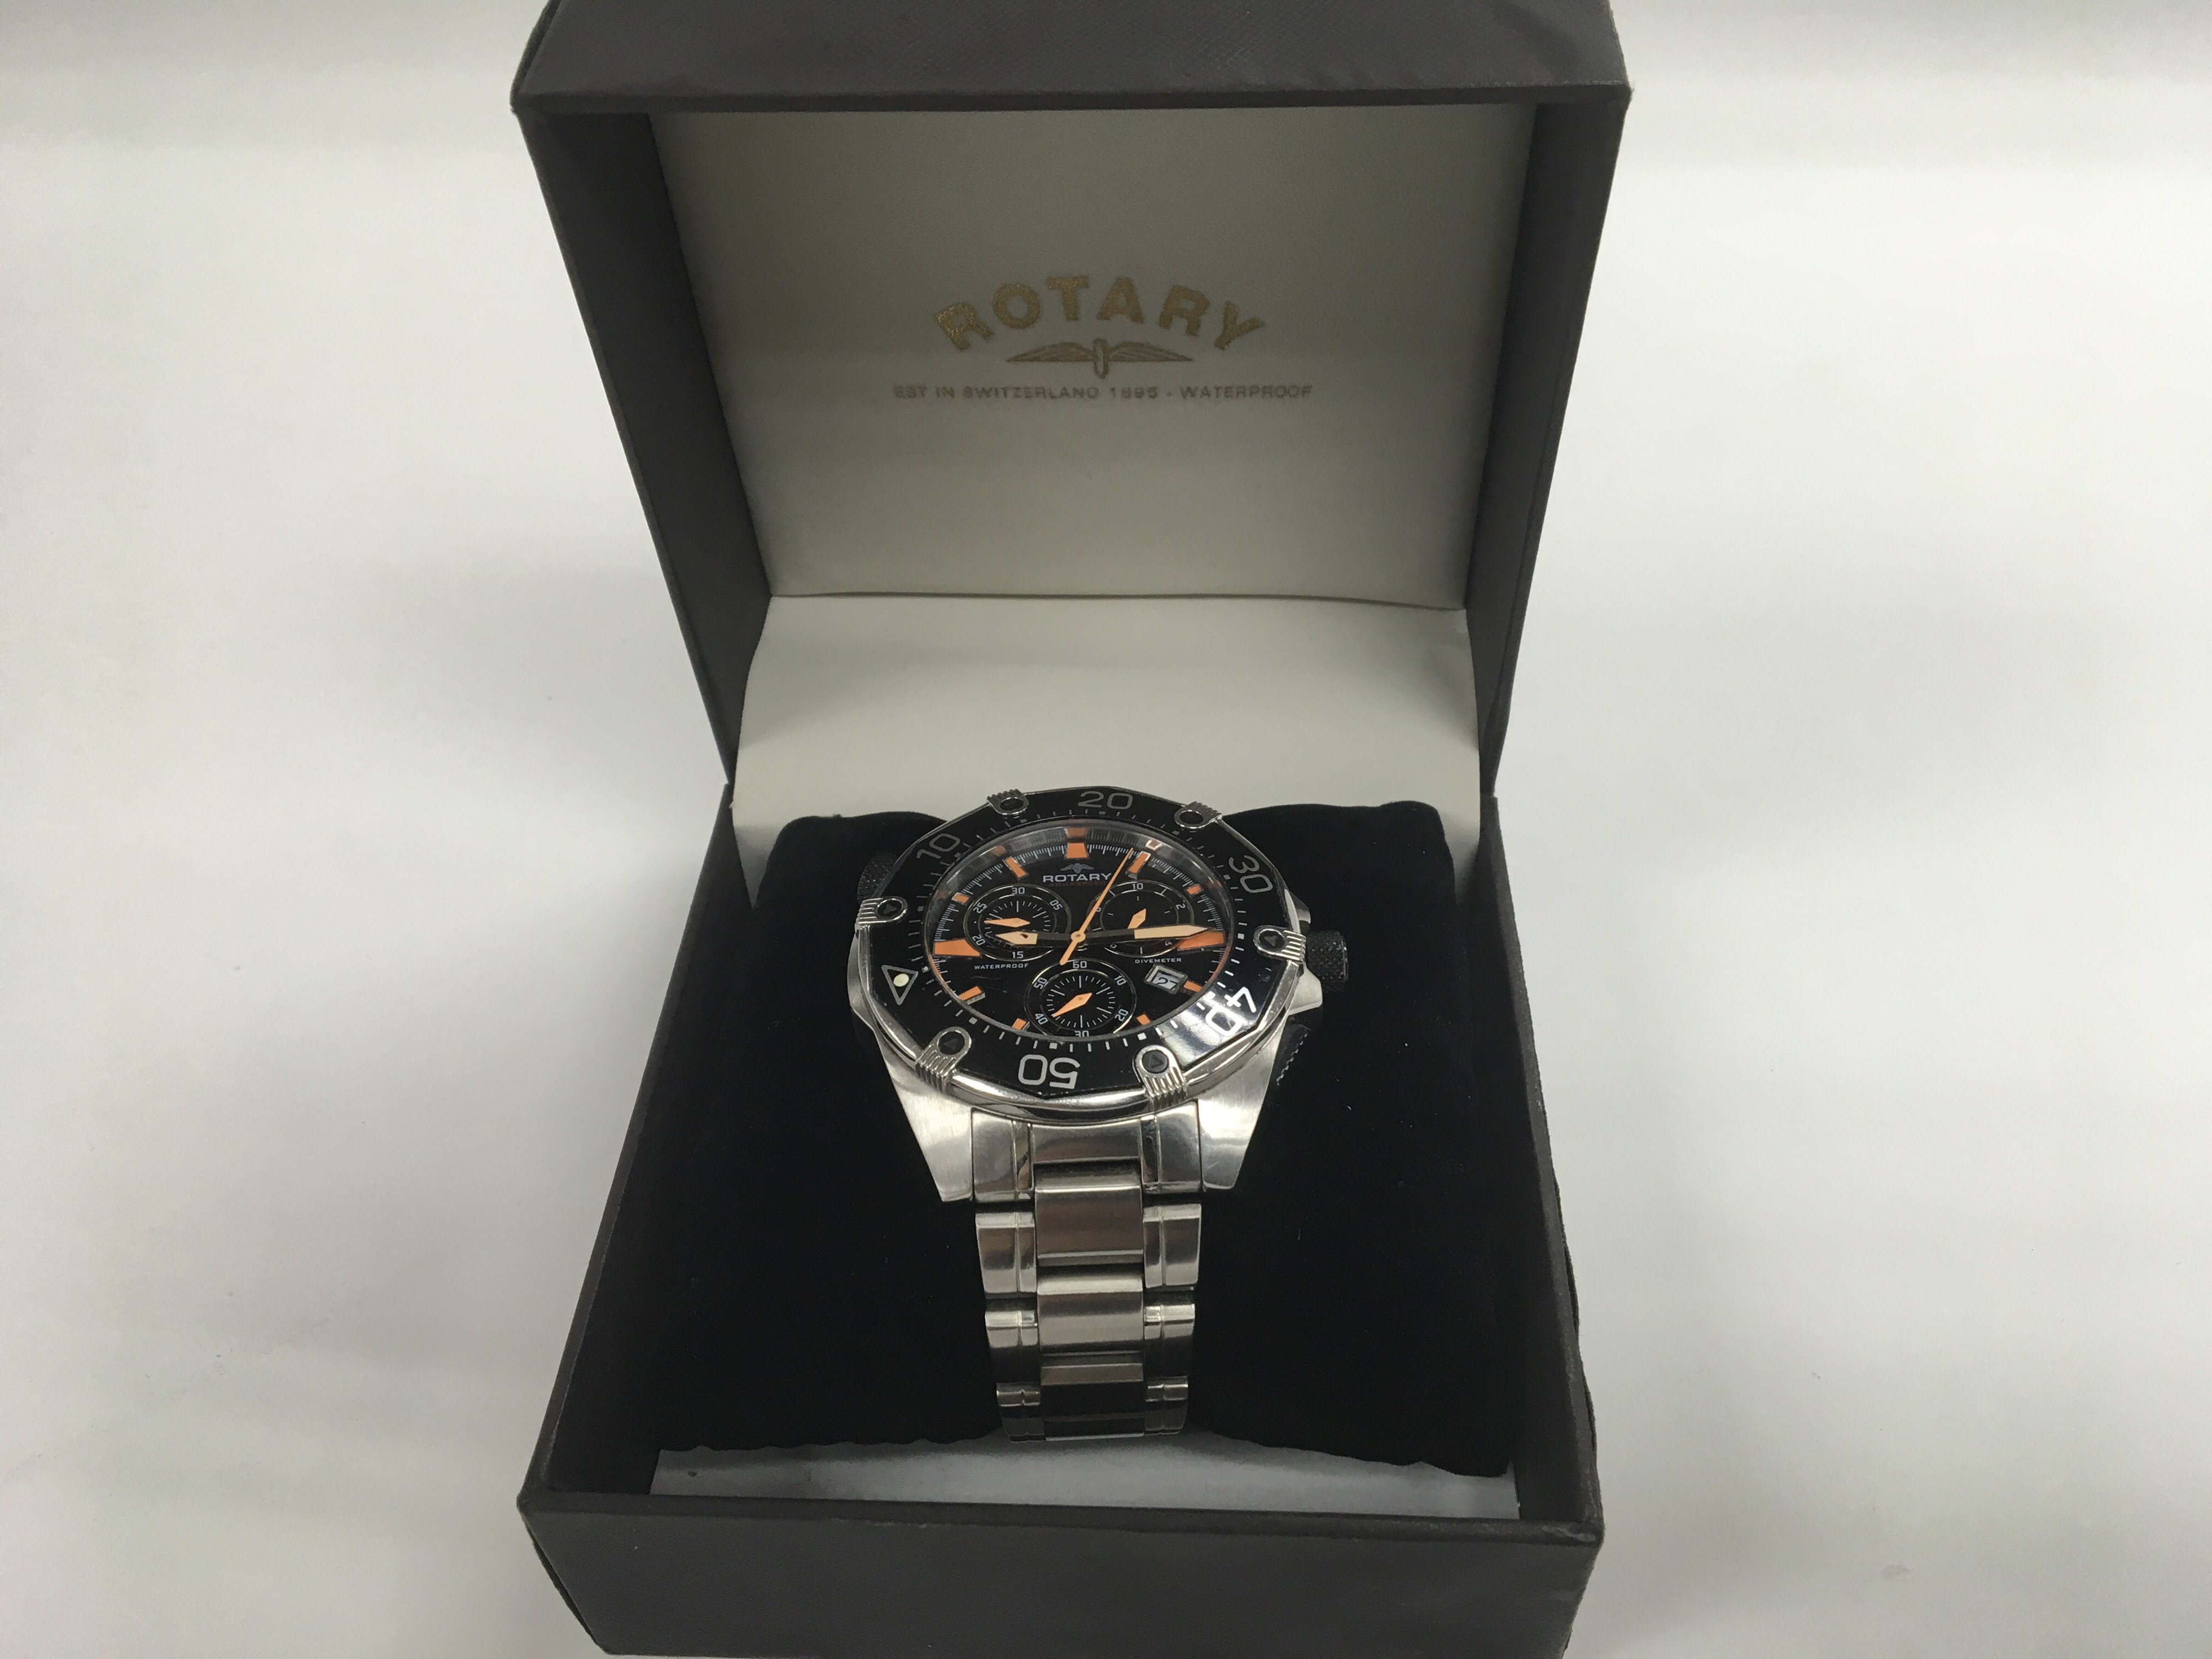 A boxed gents Rotary Aquaspeed chronograph watch.